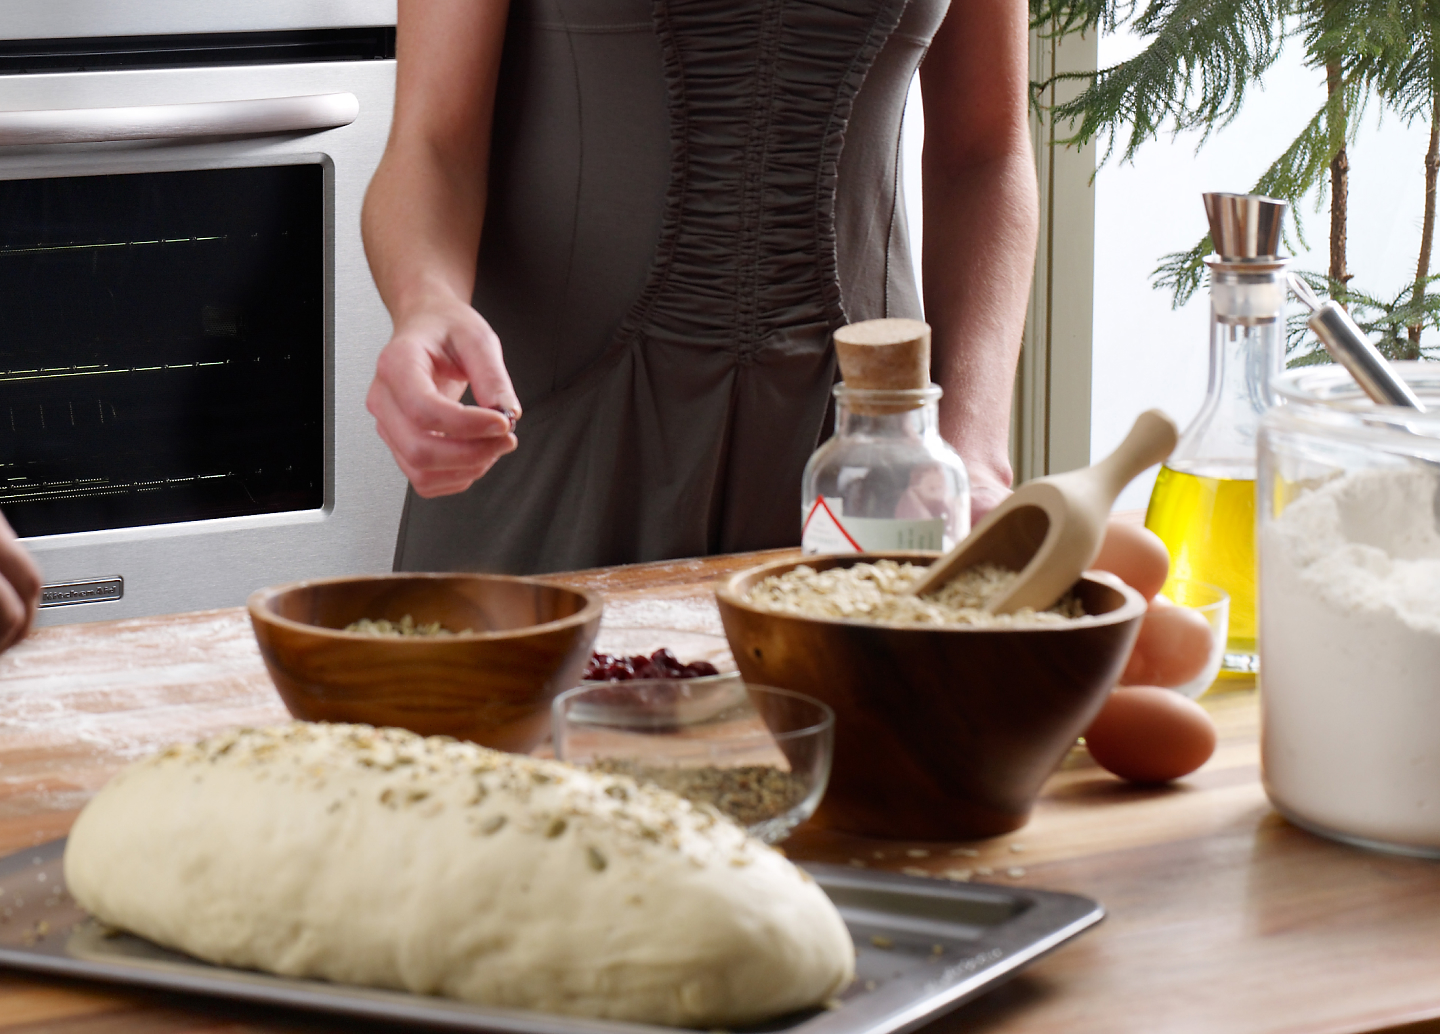 A woman adding spices to a loaf of bread dough that’s ready to go into the oven.